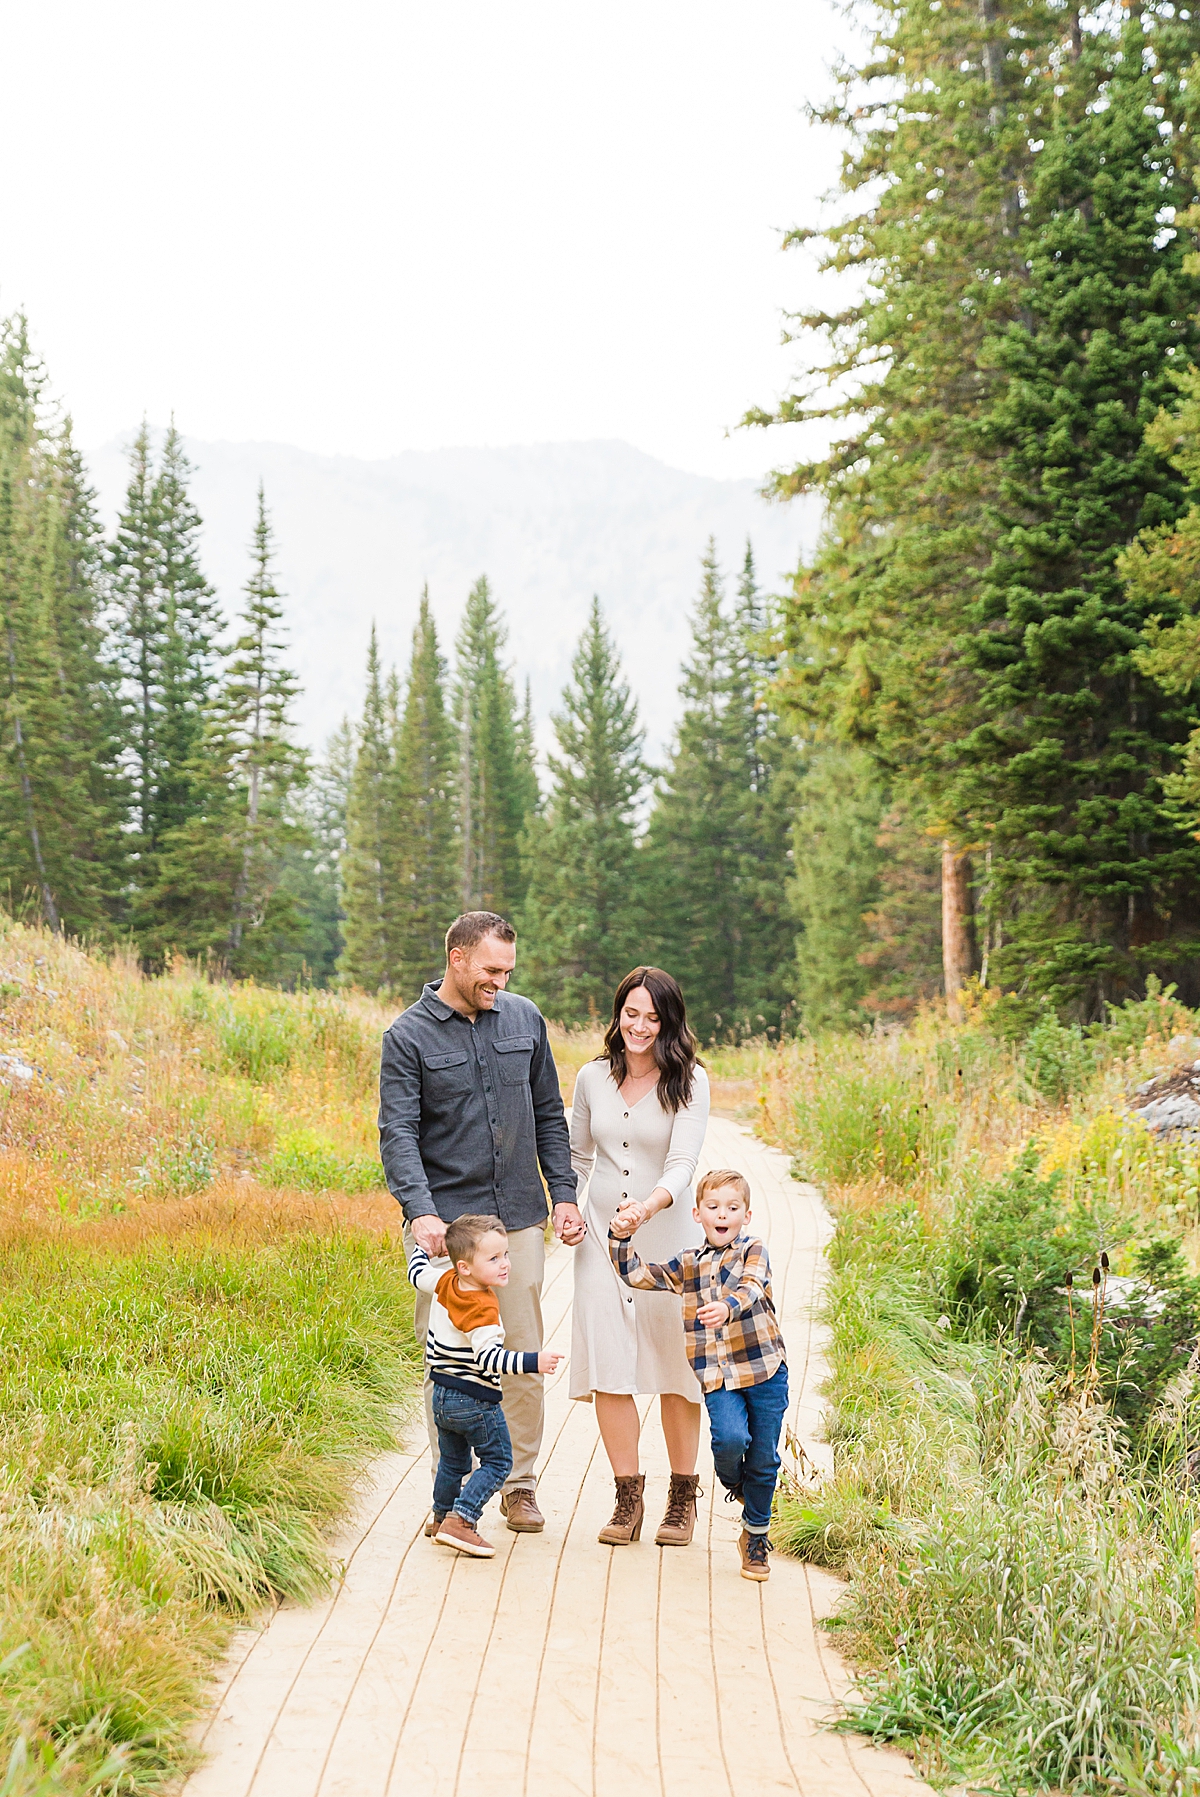 Leah Hope Photography | Salt Lake City Utah Family Photos | Green Nature | Family Pictures | What to Wear | Family Posing Poses | Scottsdale Photographer | Family Child Photographer | Outfits and Styling Ideas | Family Photography | Playful Candid Pictures | Mountain Photos | Albion Basin | Forest Scenery